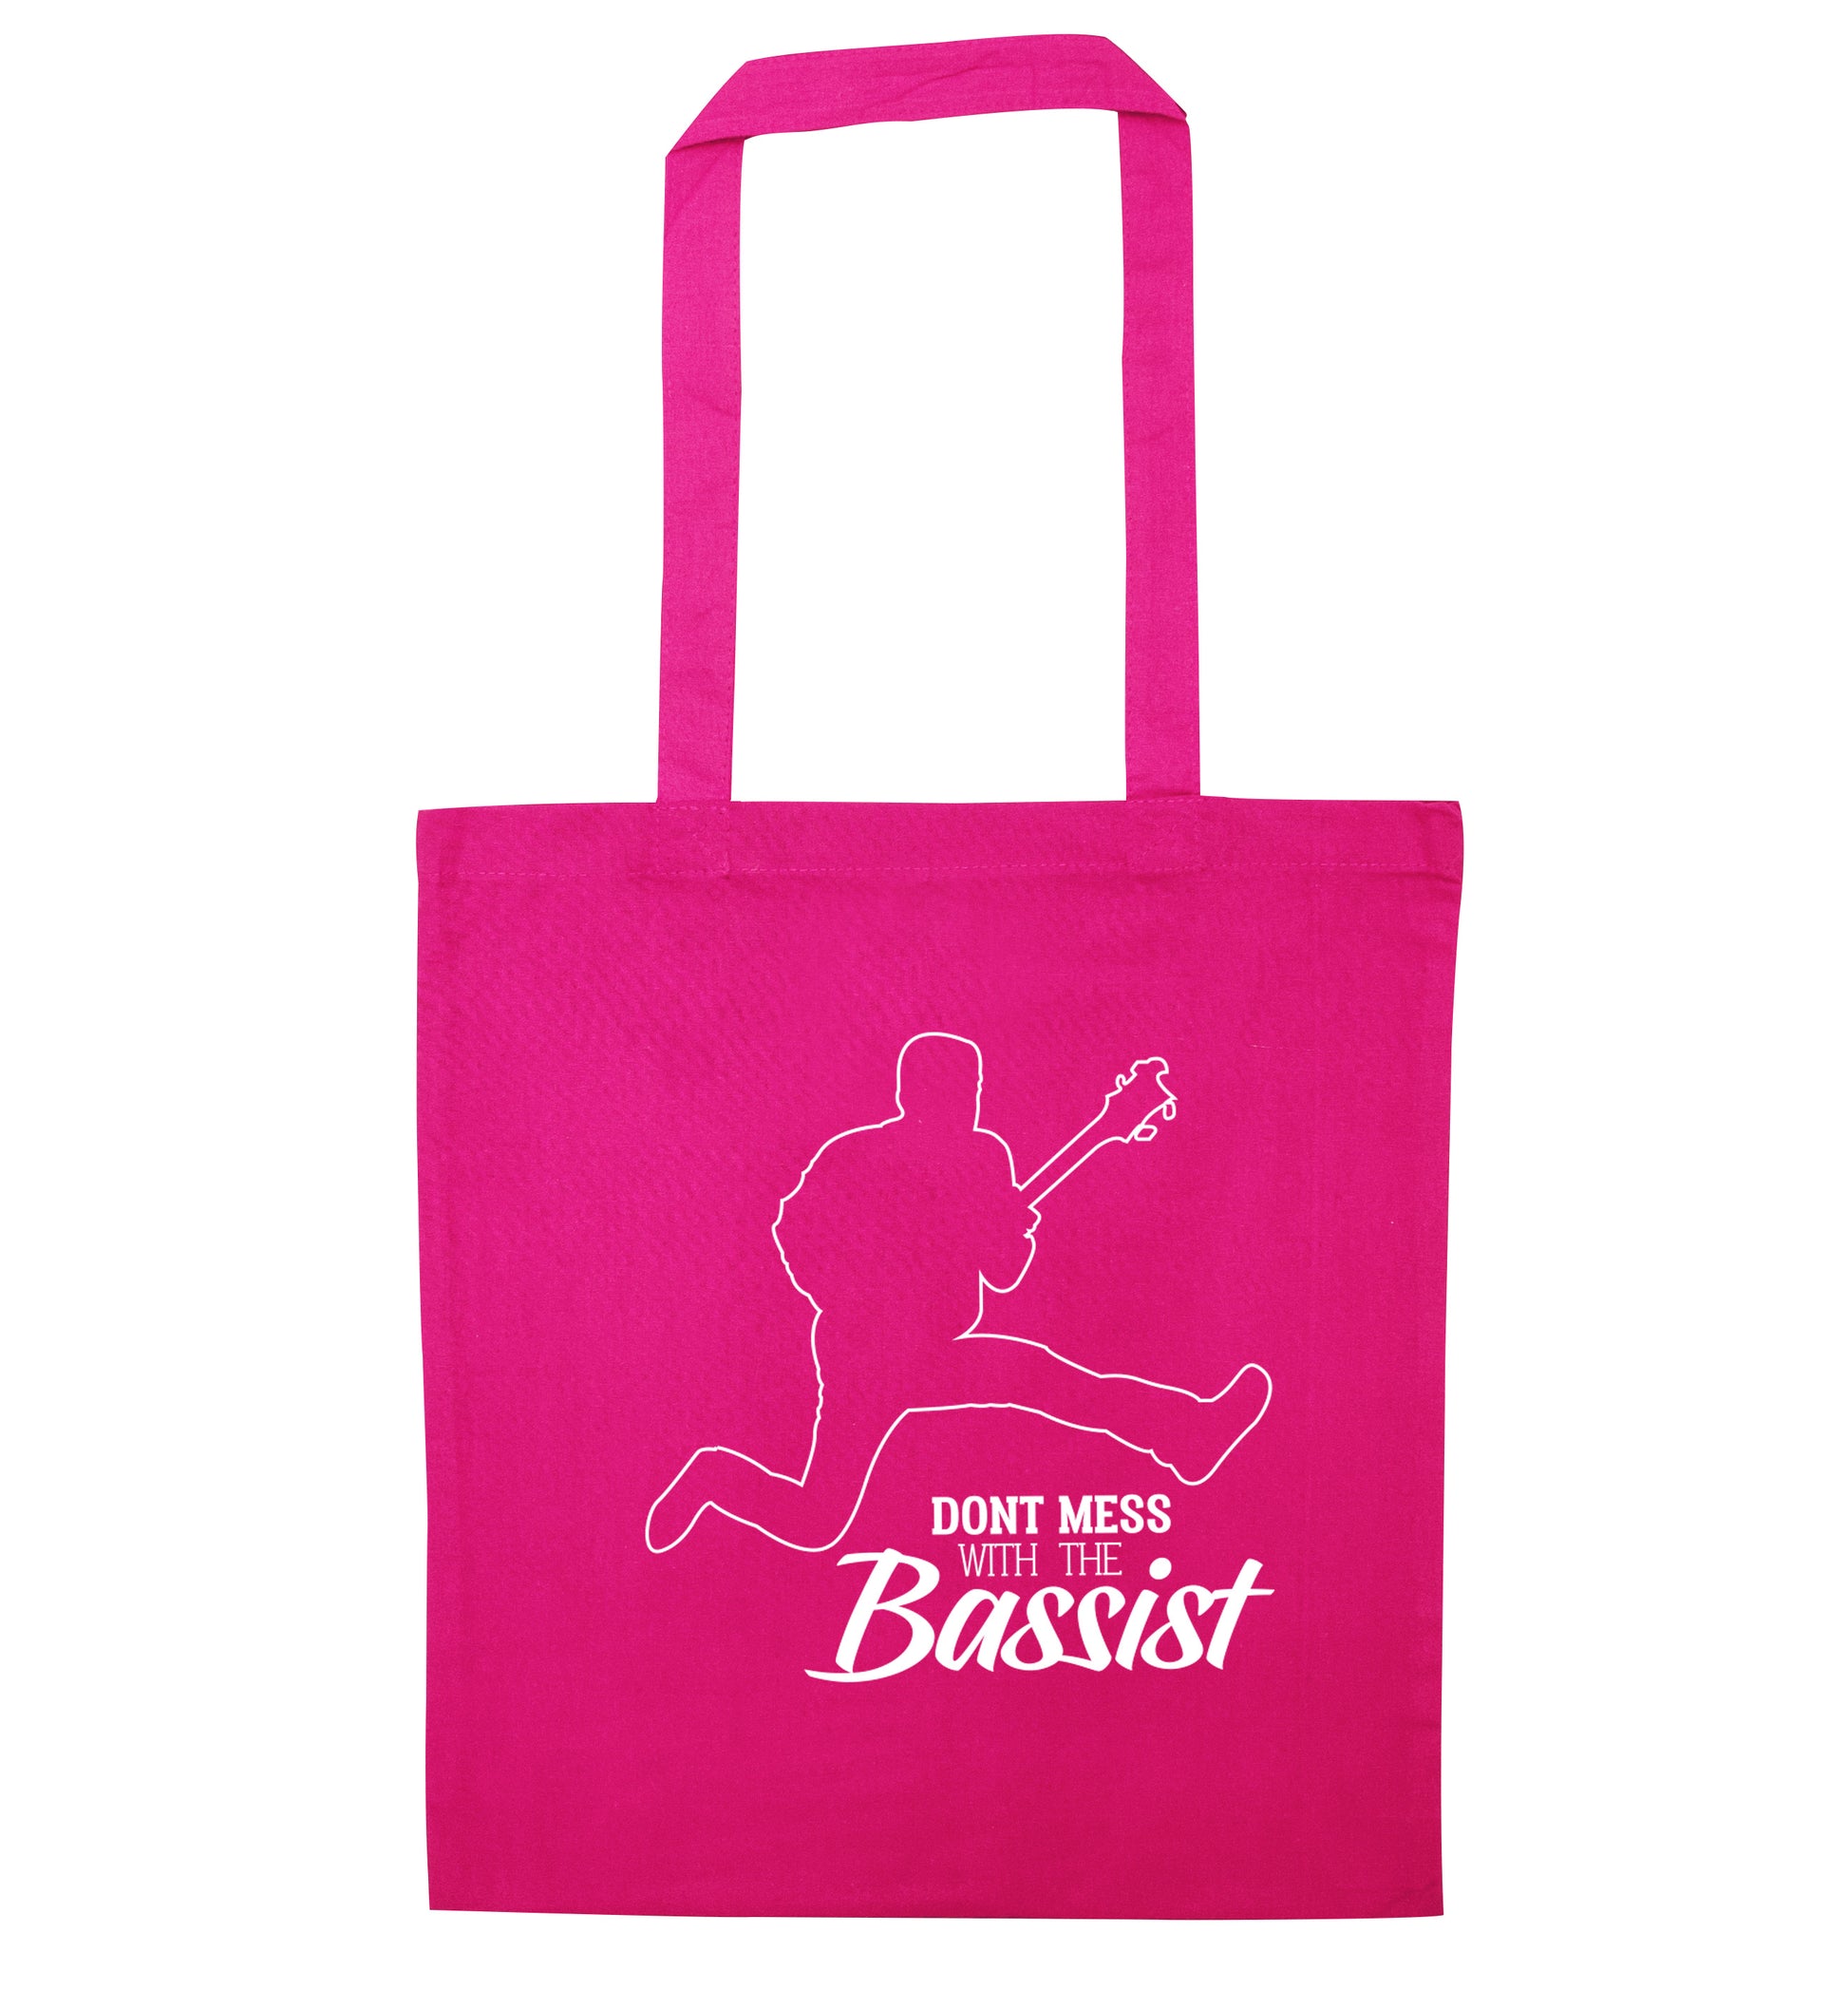 Dont mess with the bassist pink tote bag